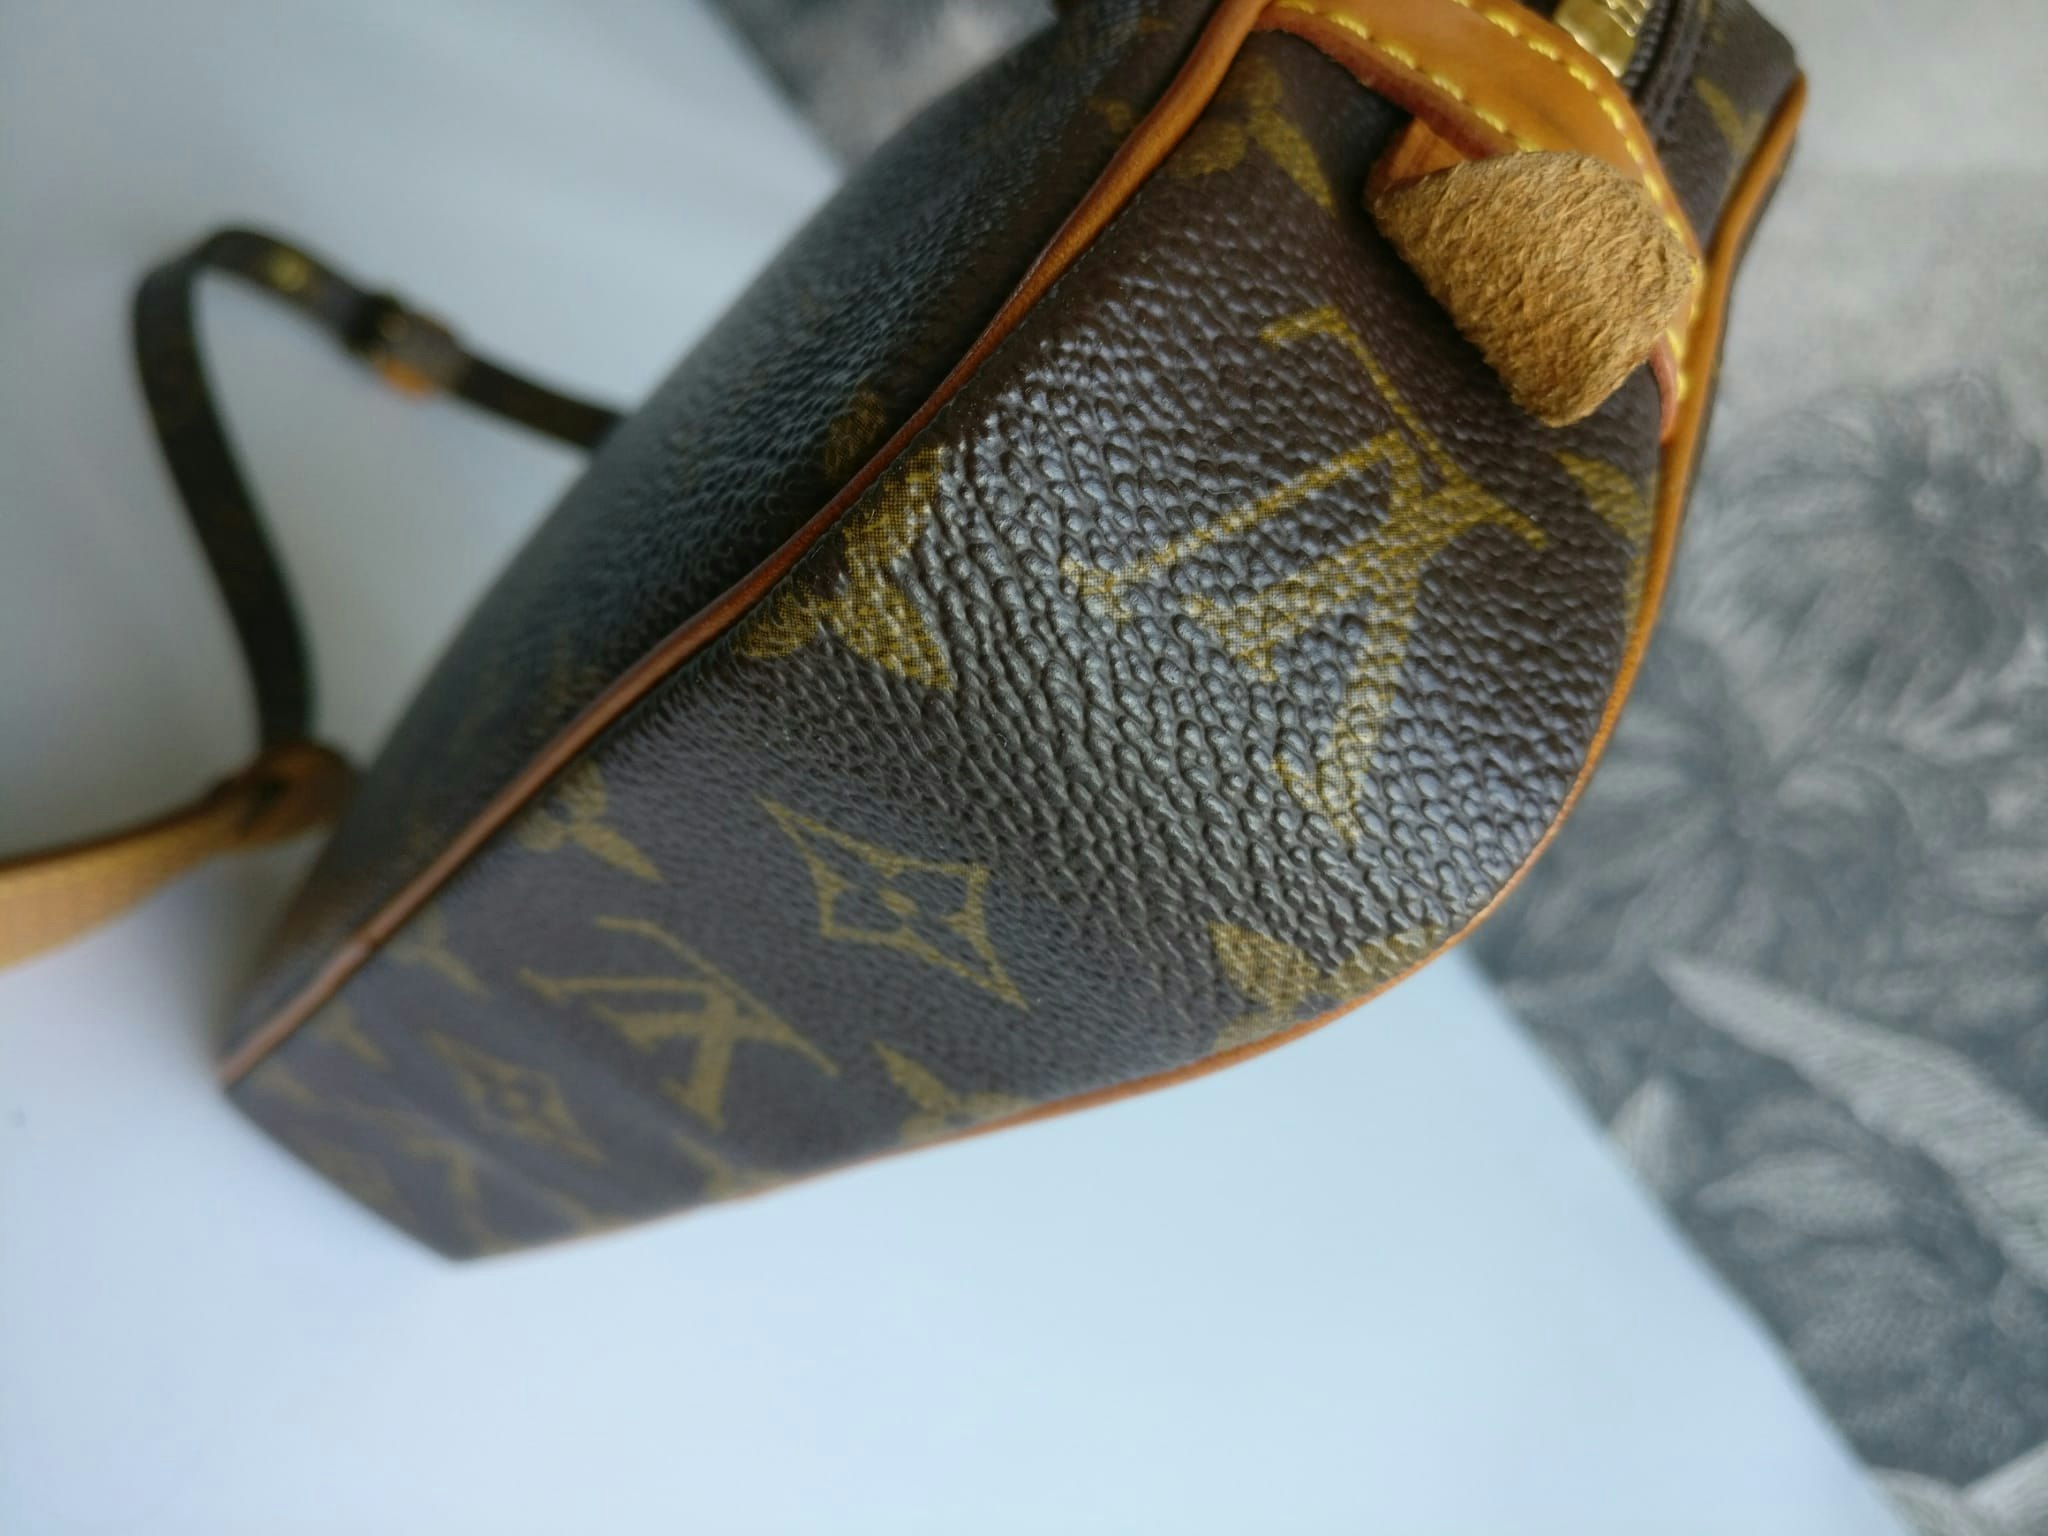 Monogram Pochette Marly Bandouliere – Loom & Magpie Boutique